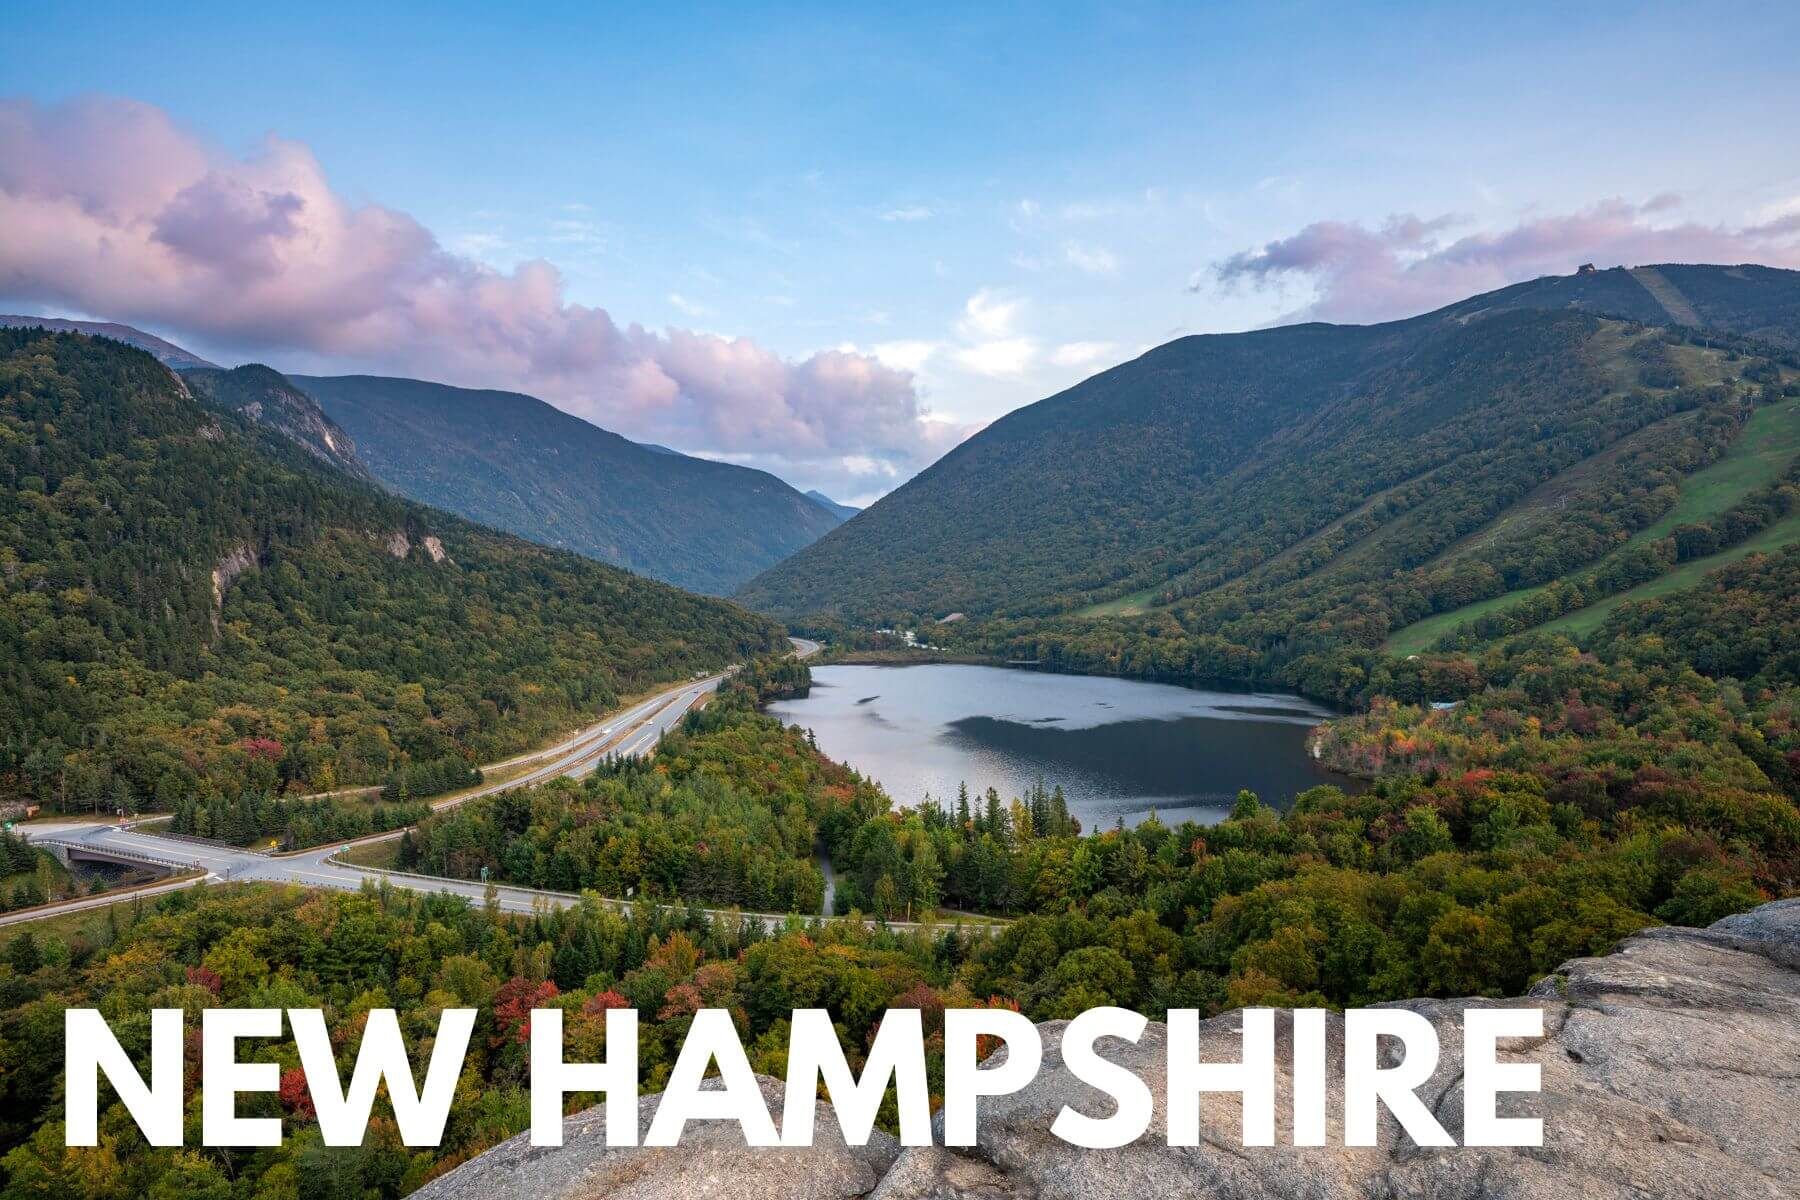 Photo of the view over Echo Lake surrounded by hills covered in trees from Artists Bluff summit with the words New Hampshire overlaid